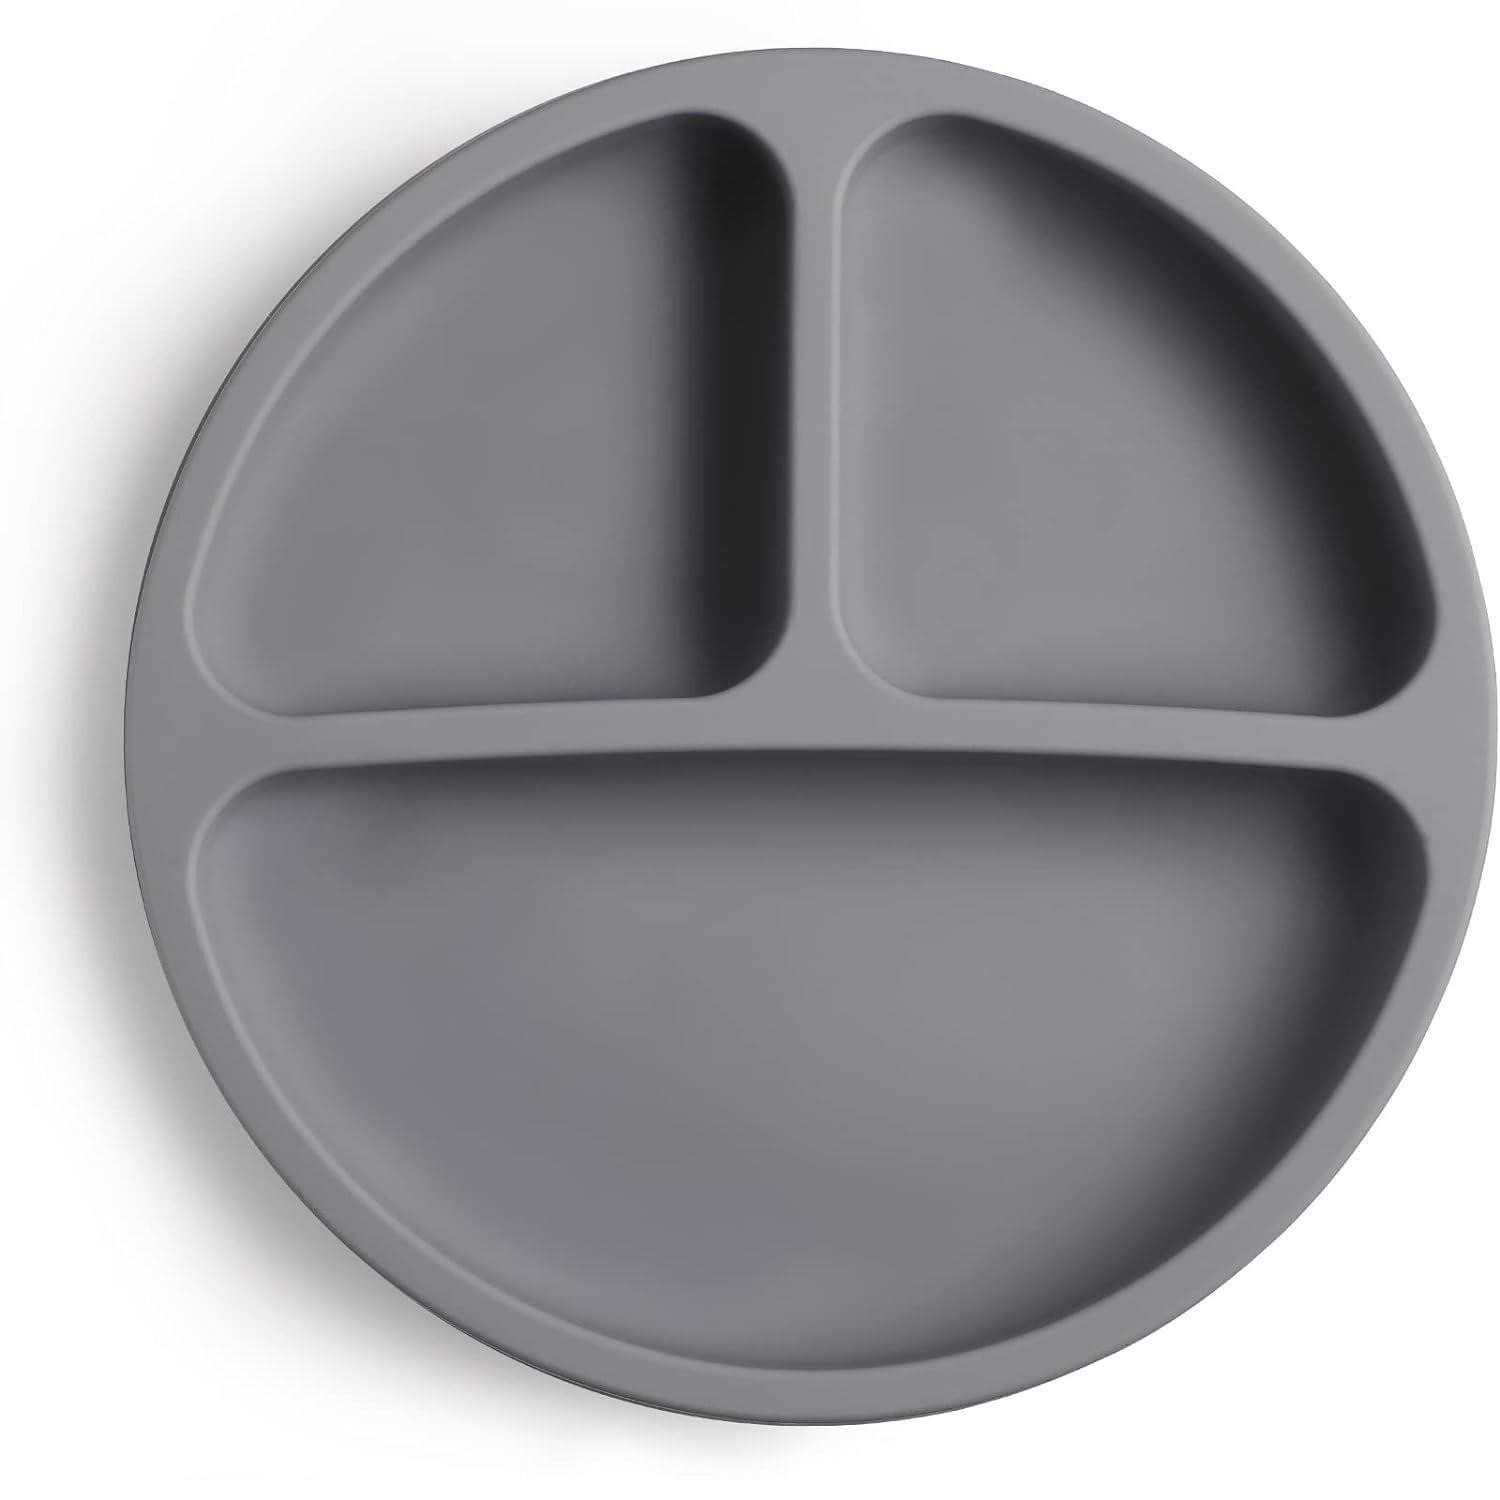 100% Food-Grade Silicone Suction Plate